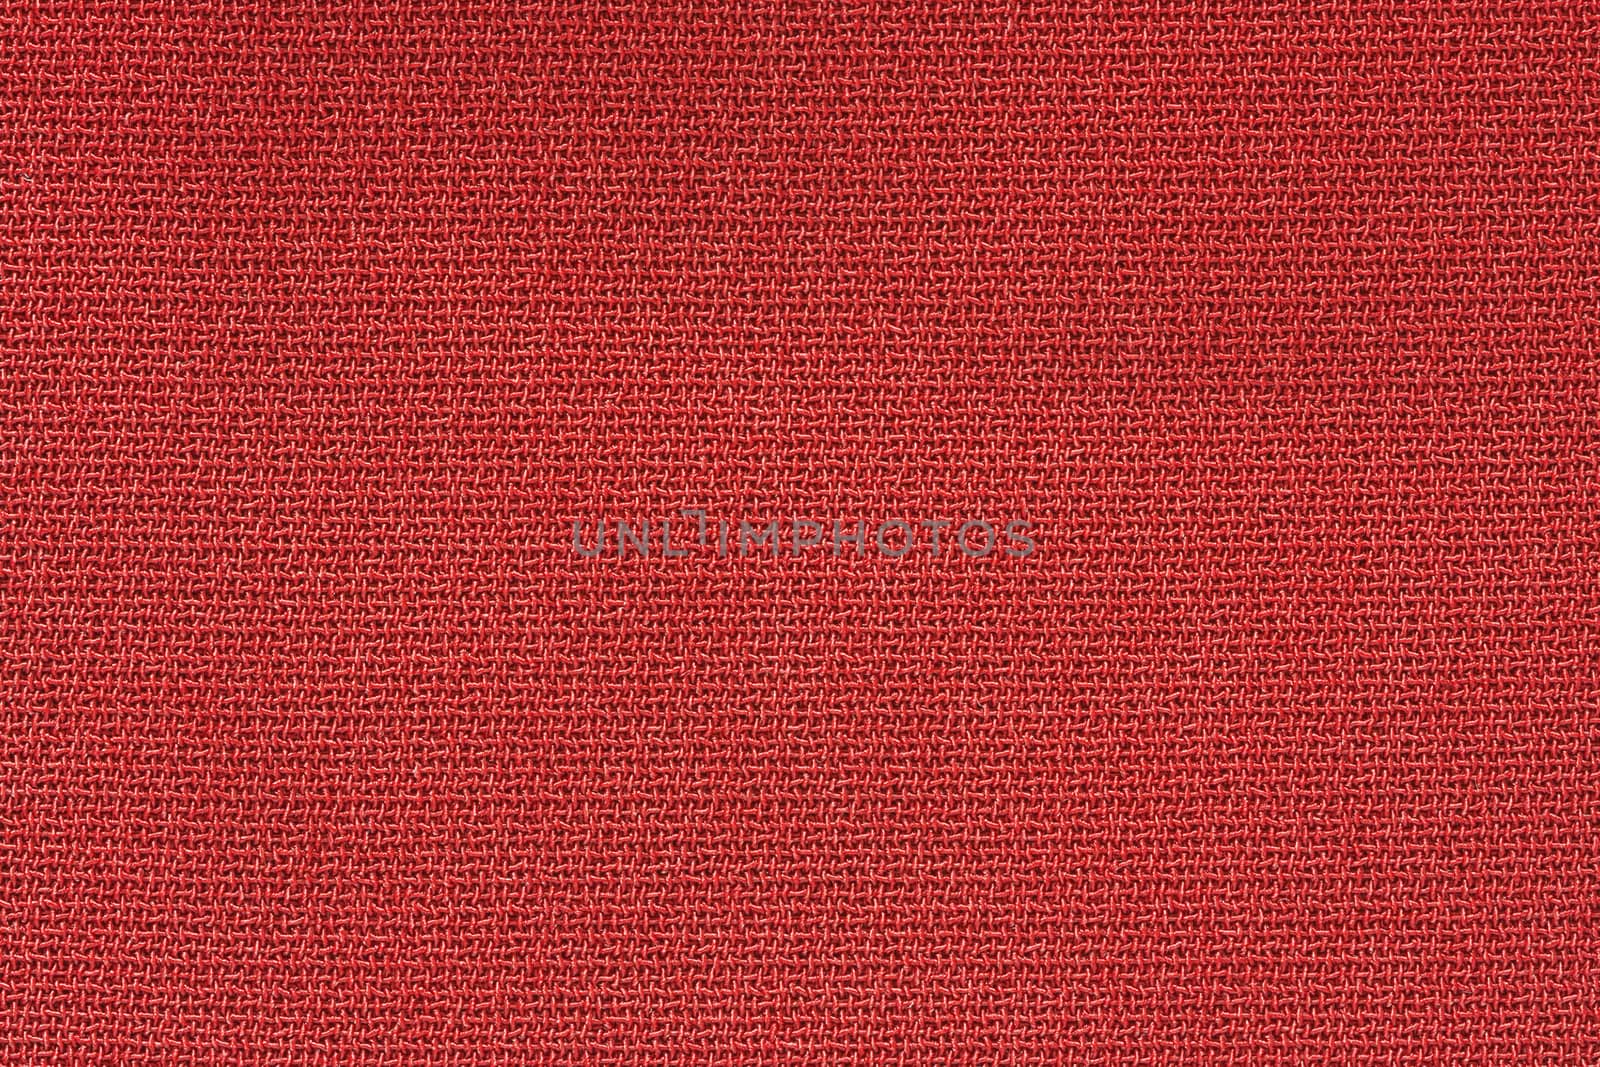 Close Up Background Pattern of red Textile Texture, Abstract color textile net pattern texture